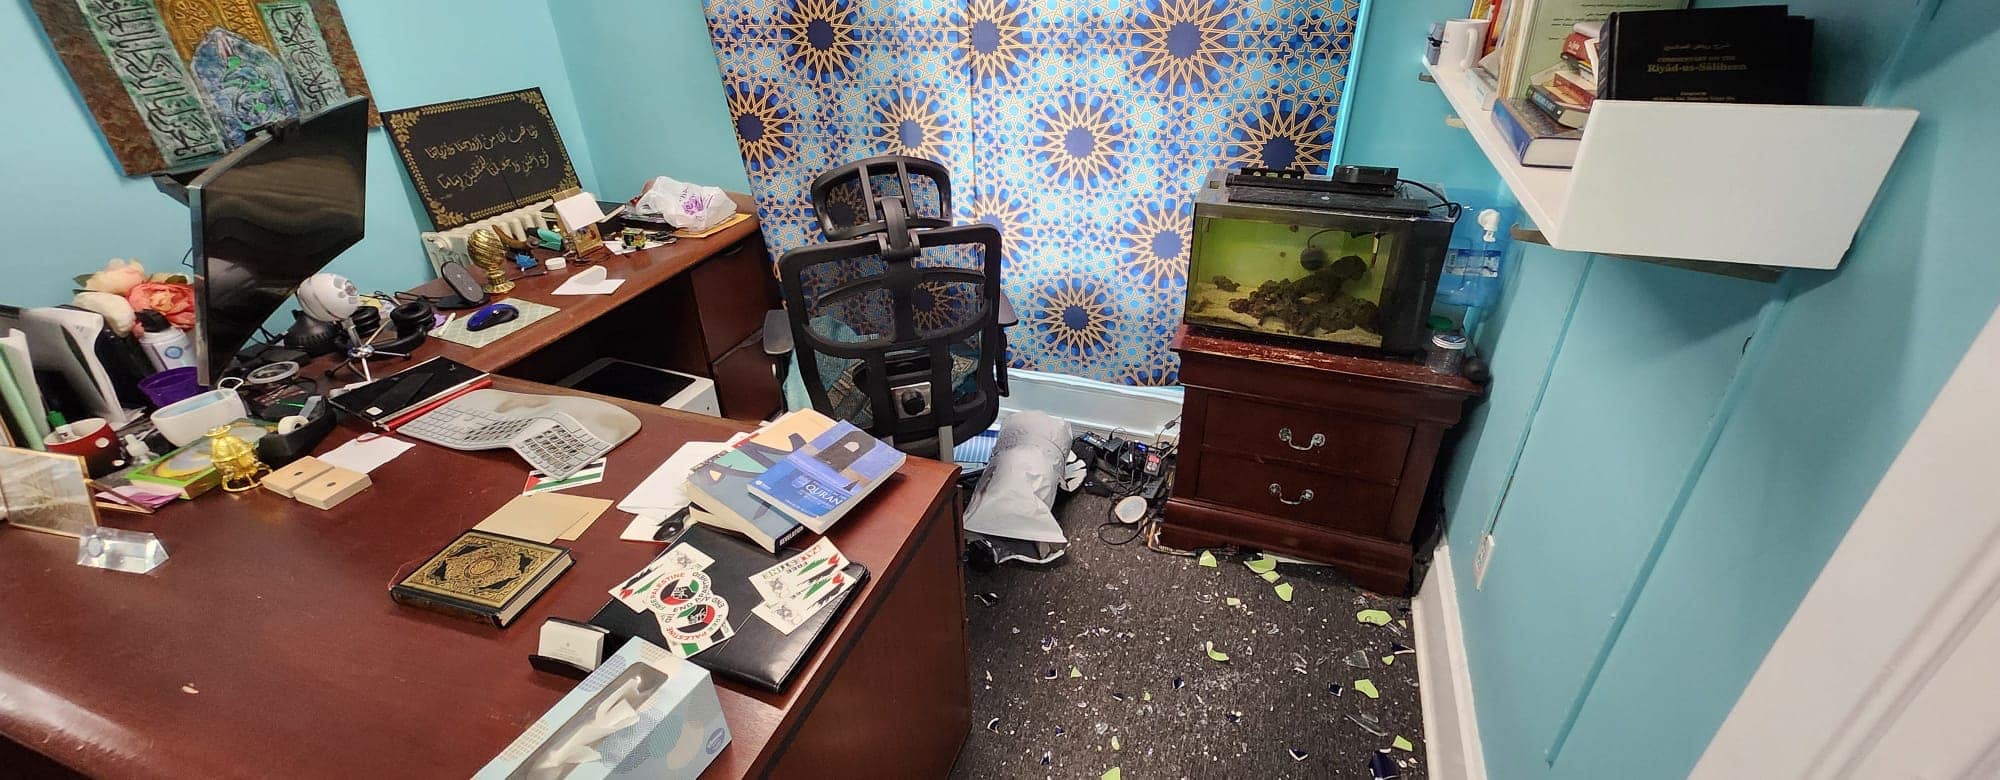 Damage at the Centre of Islamic Life at Rutgers University, New Jersey